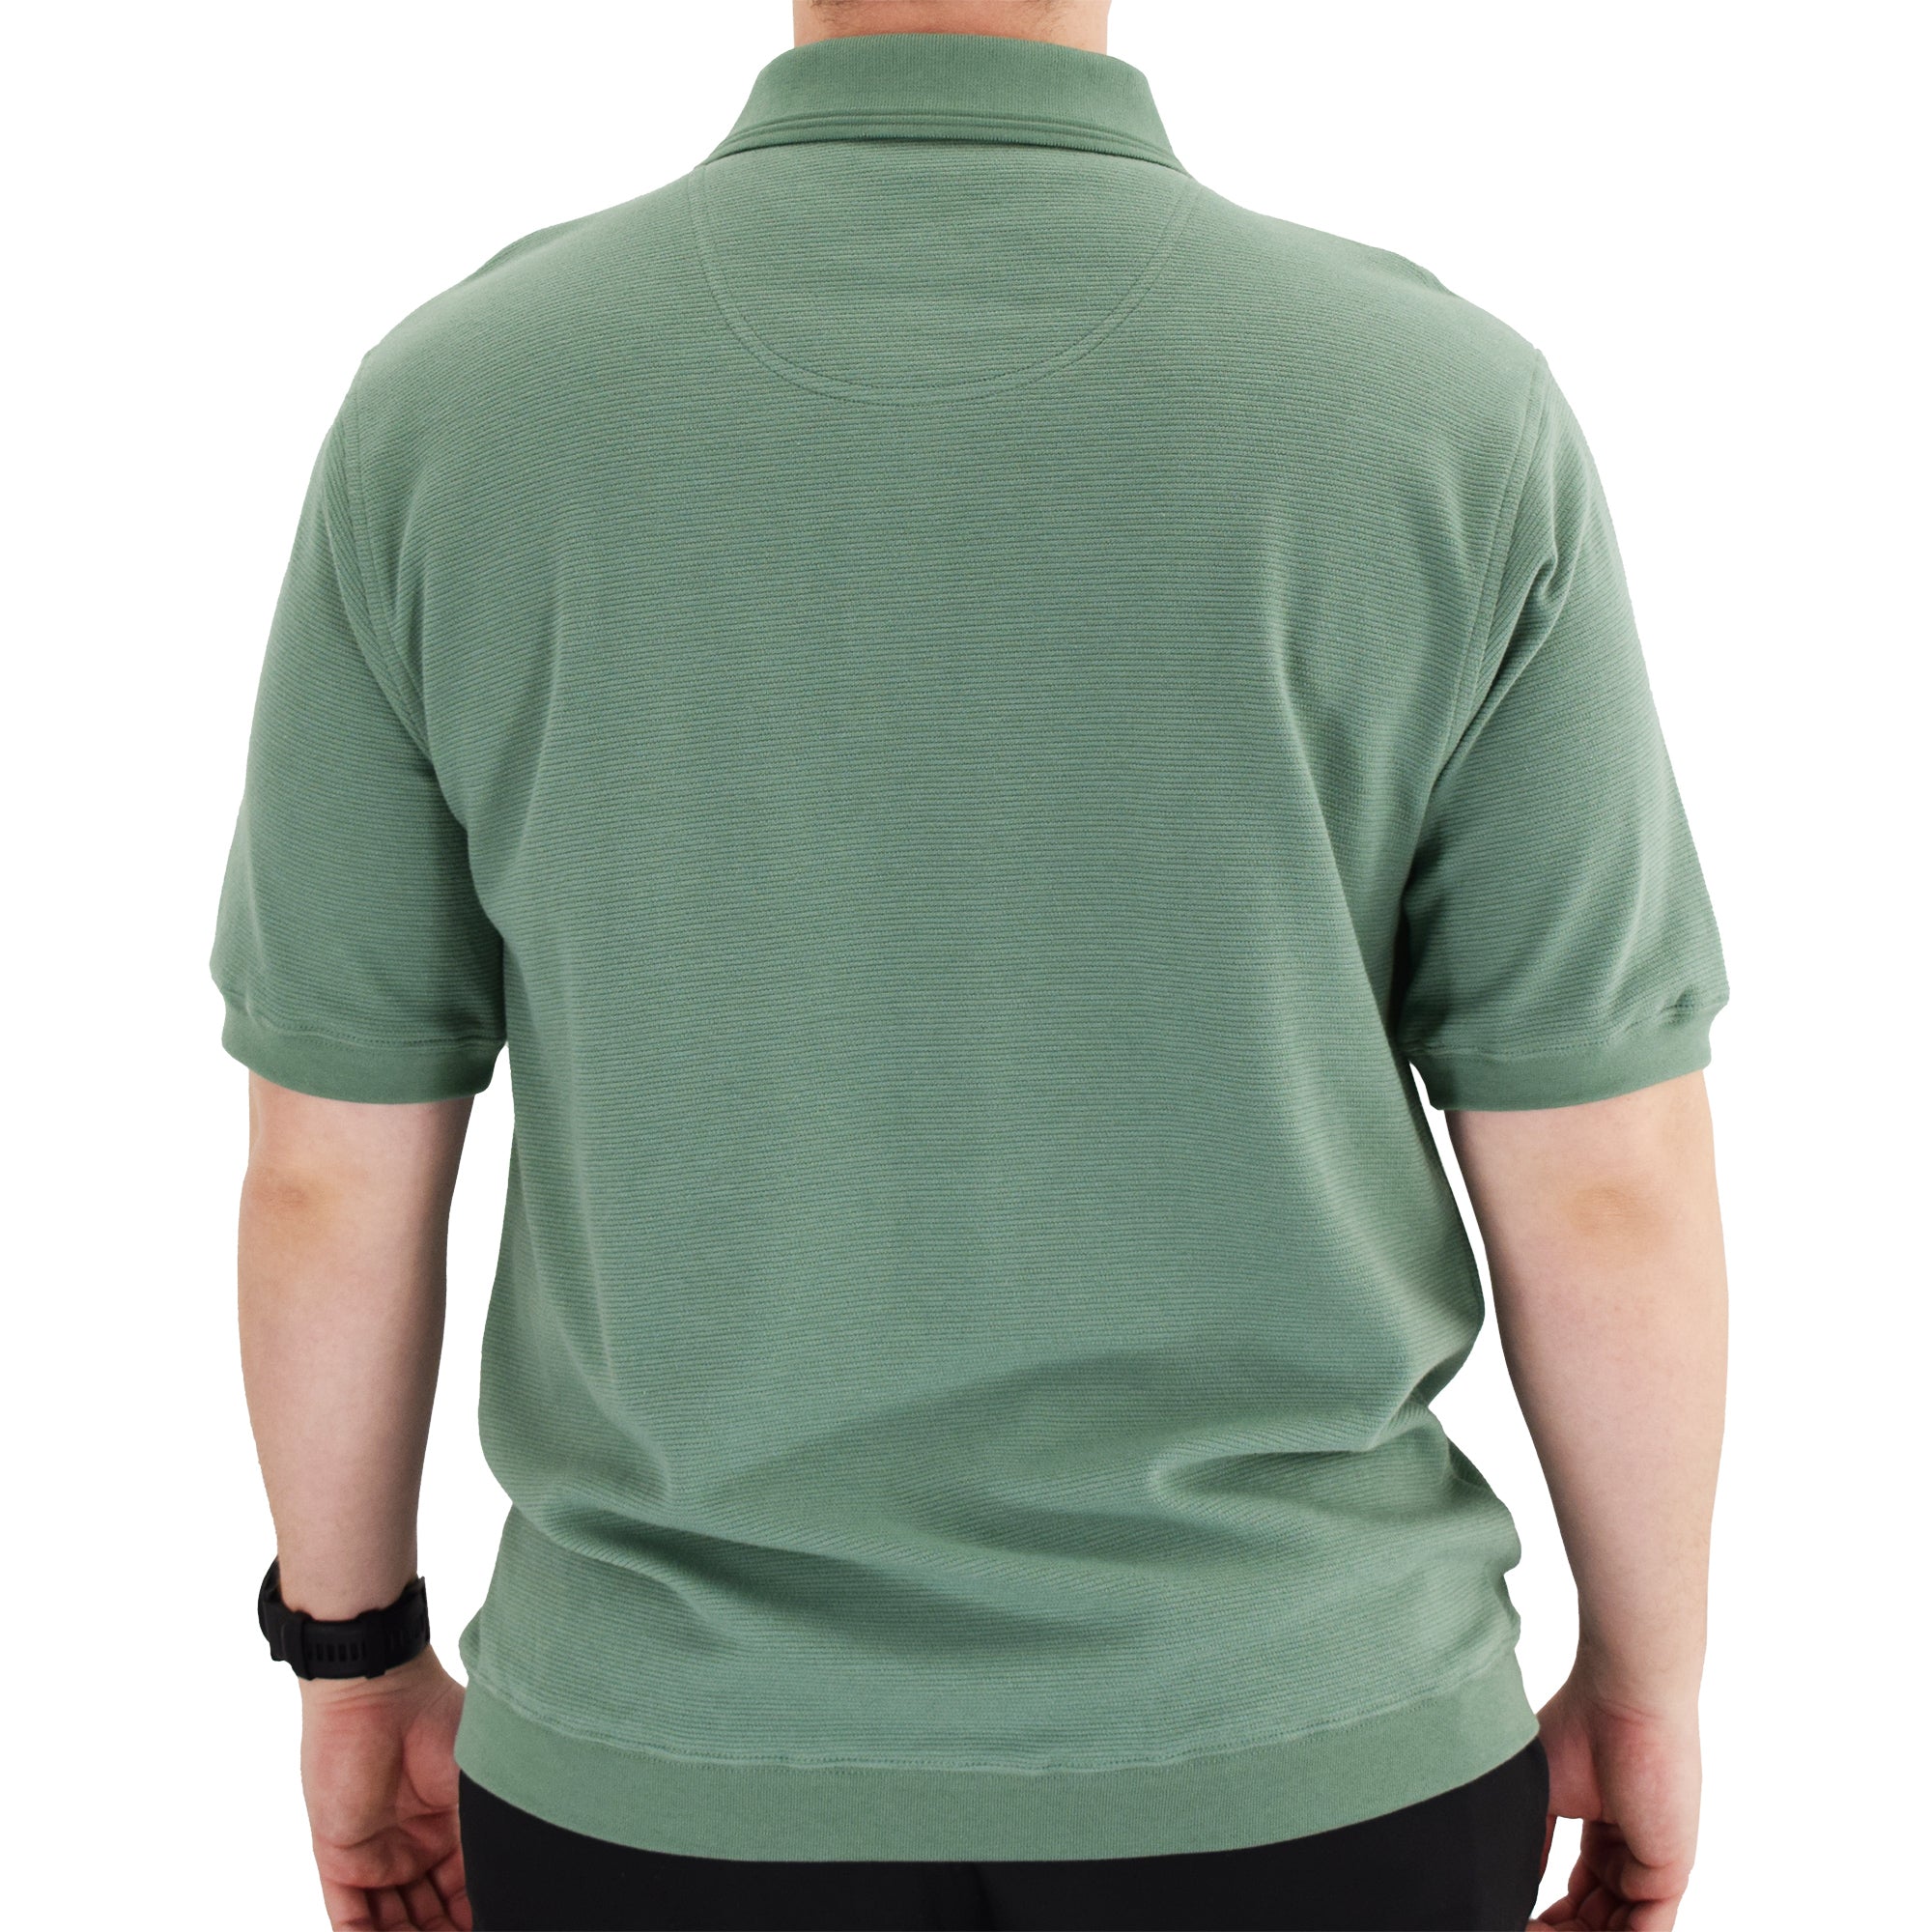 Classics by Palmland Short Sleeve 3 Button Banded Bottom Knit Collar 6070-100-Sage - theflagshirt